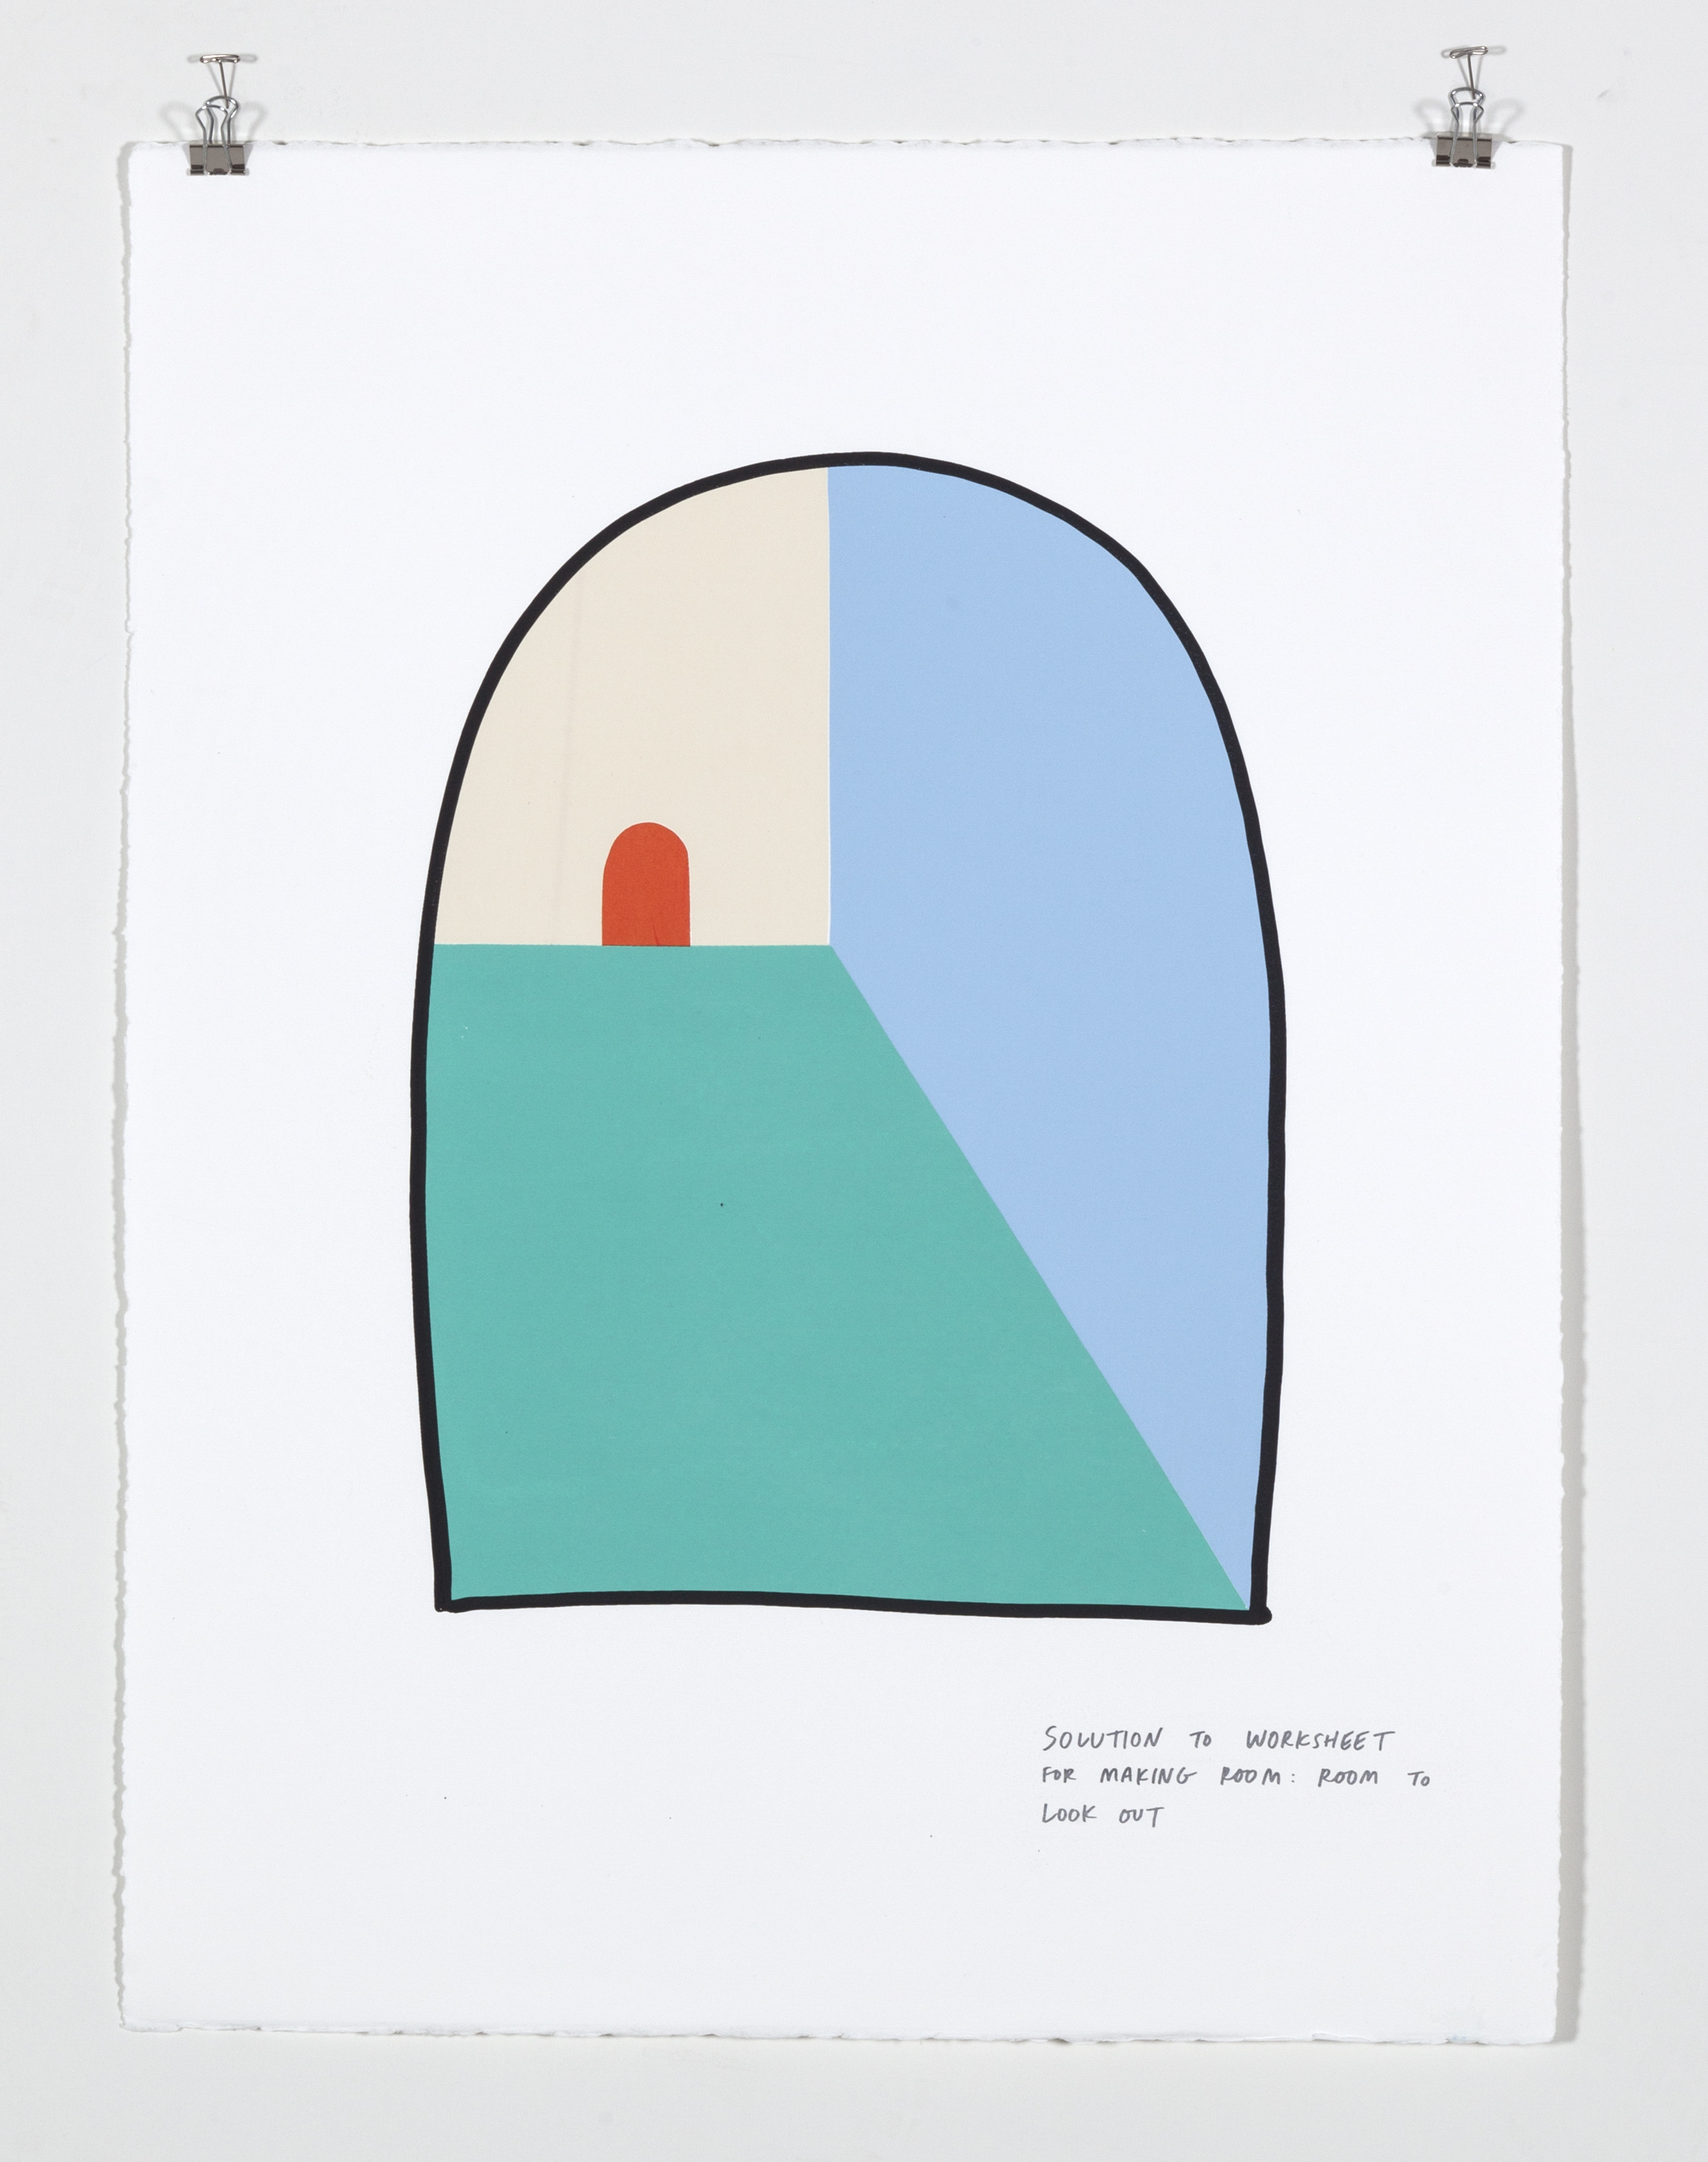    Solution to Worksheet for Making Room: Room to Look Out,  2018  Six color silkscreen print on paper 19 7/8 x 25 7/8 inches 